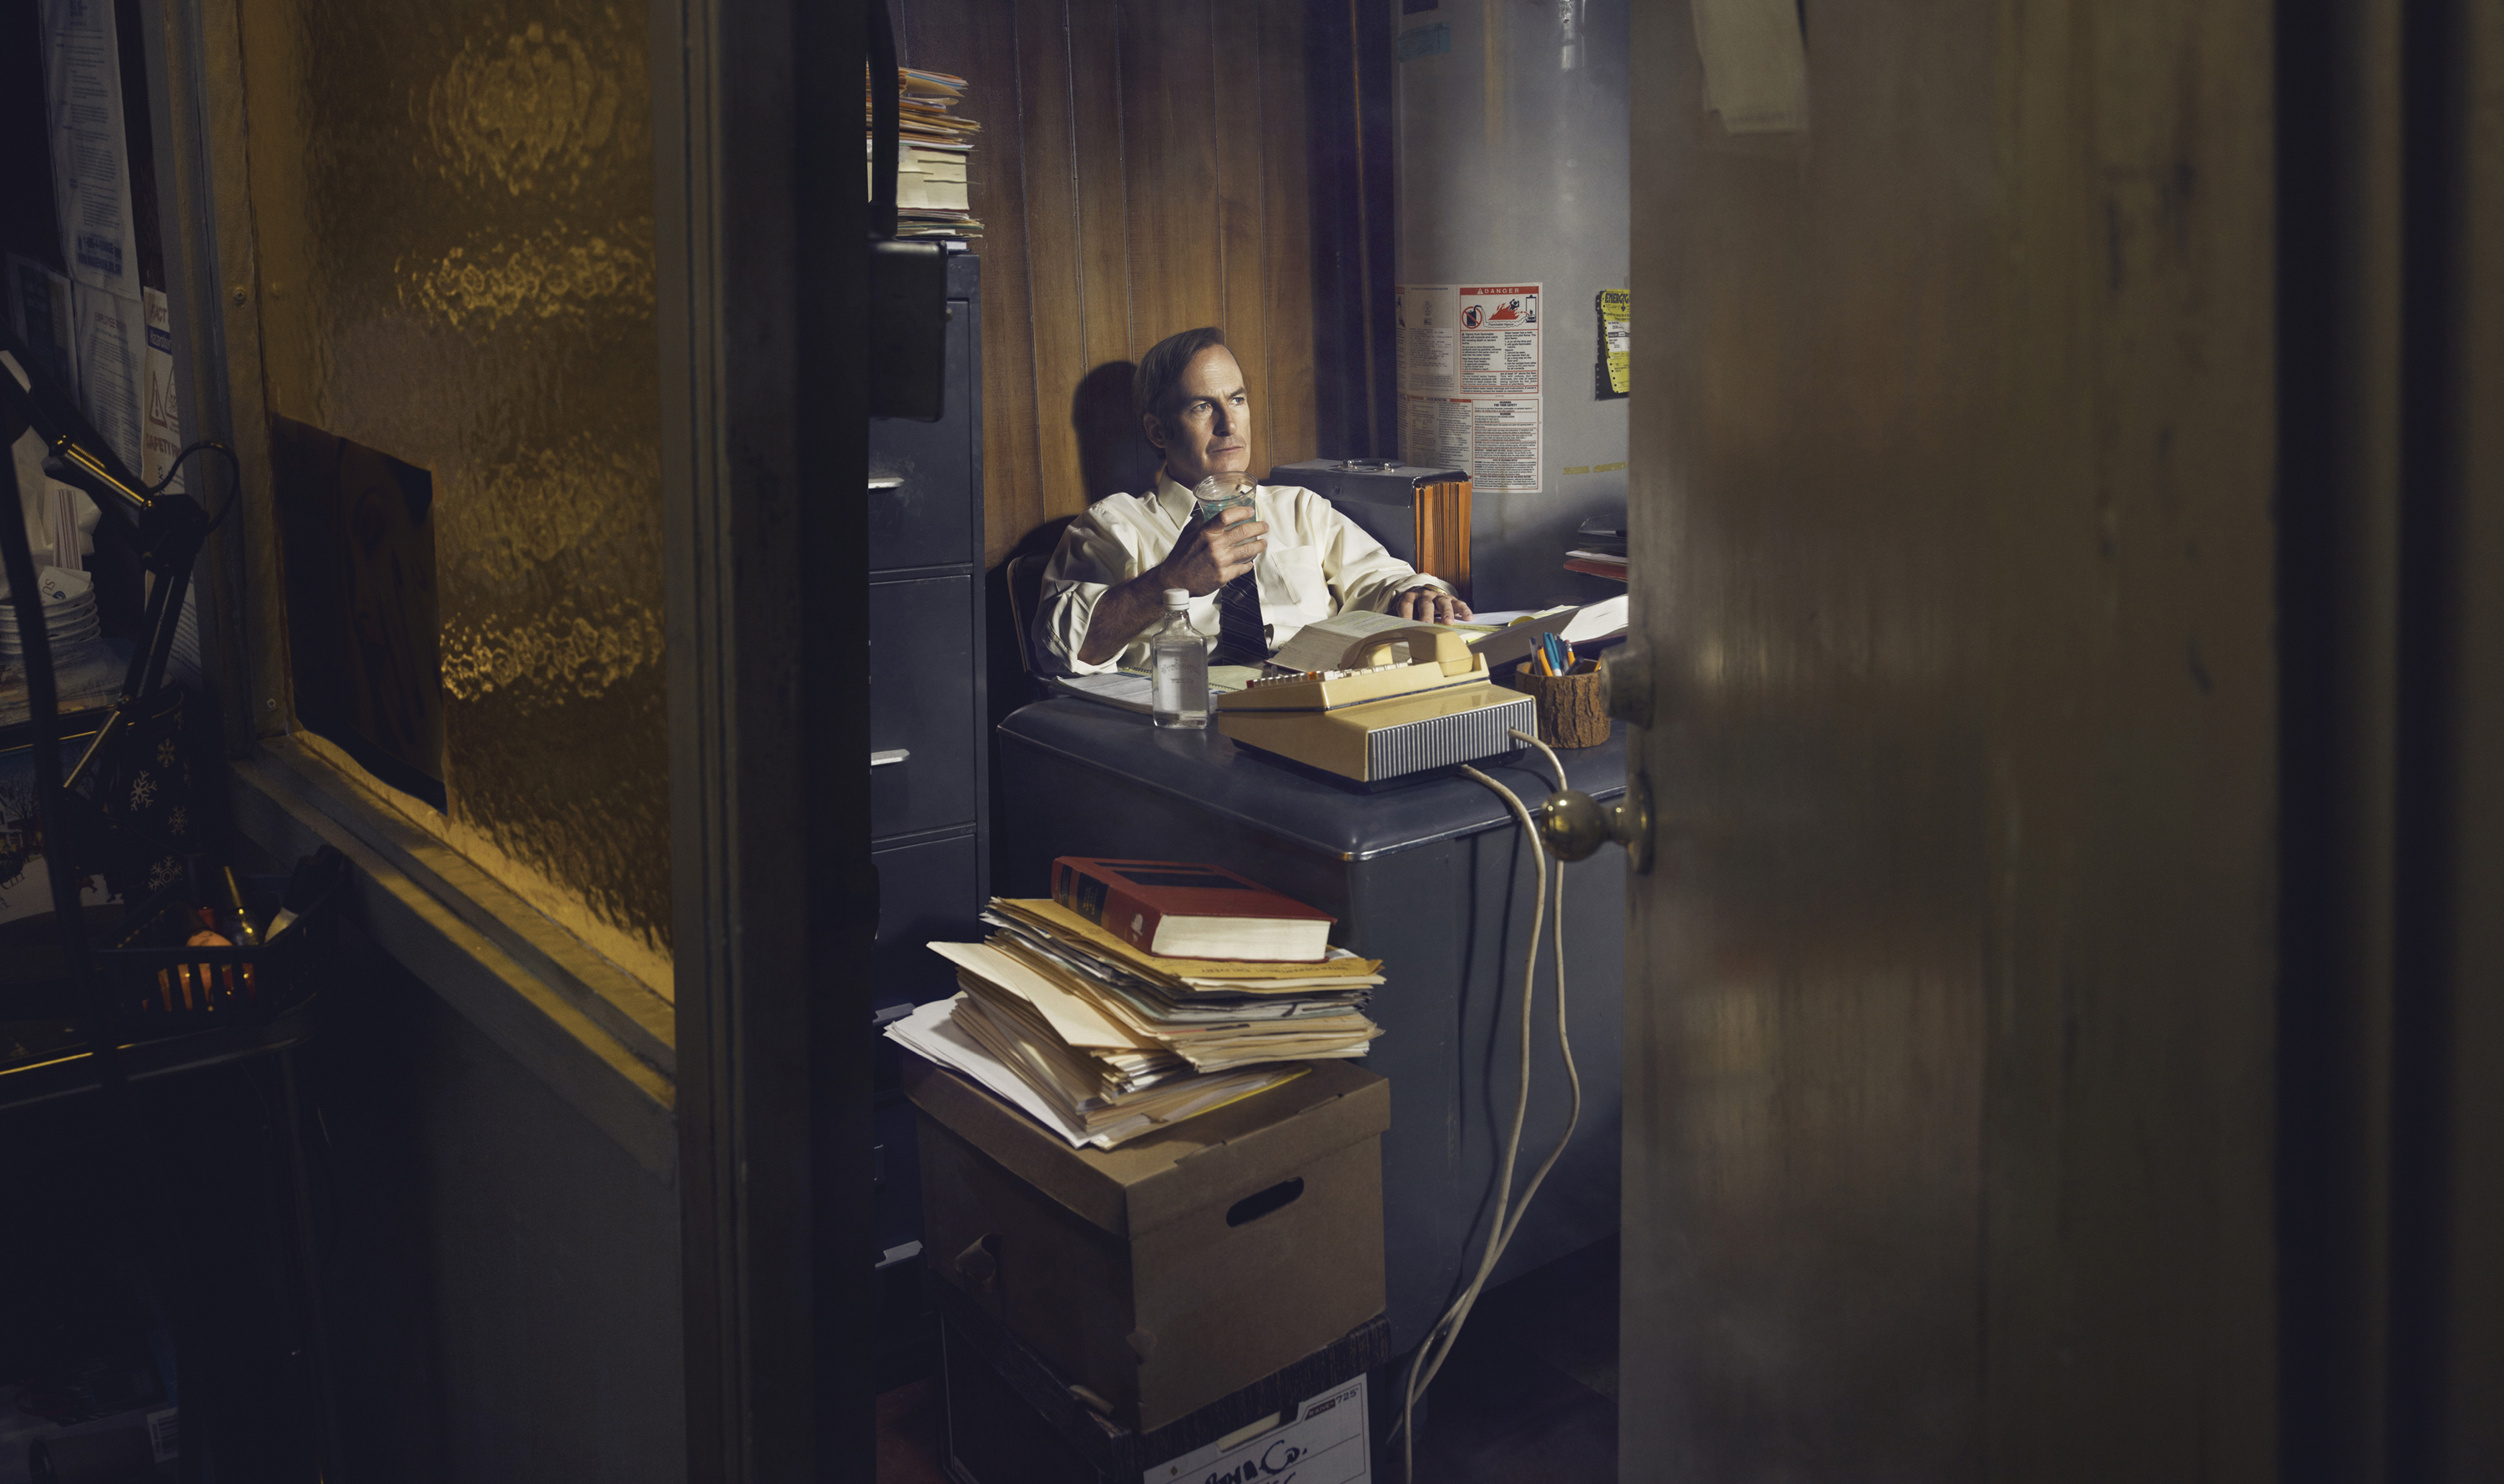 Down by law: Better Call Saul fleshes out the struggling Jimmy McGill. “They’ve added many layers,” Odenkirk says, “but there are moments that are pure Saul.” (Ben Leuner—AMC)